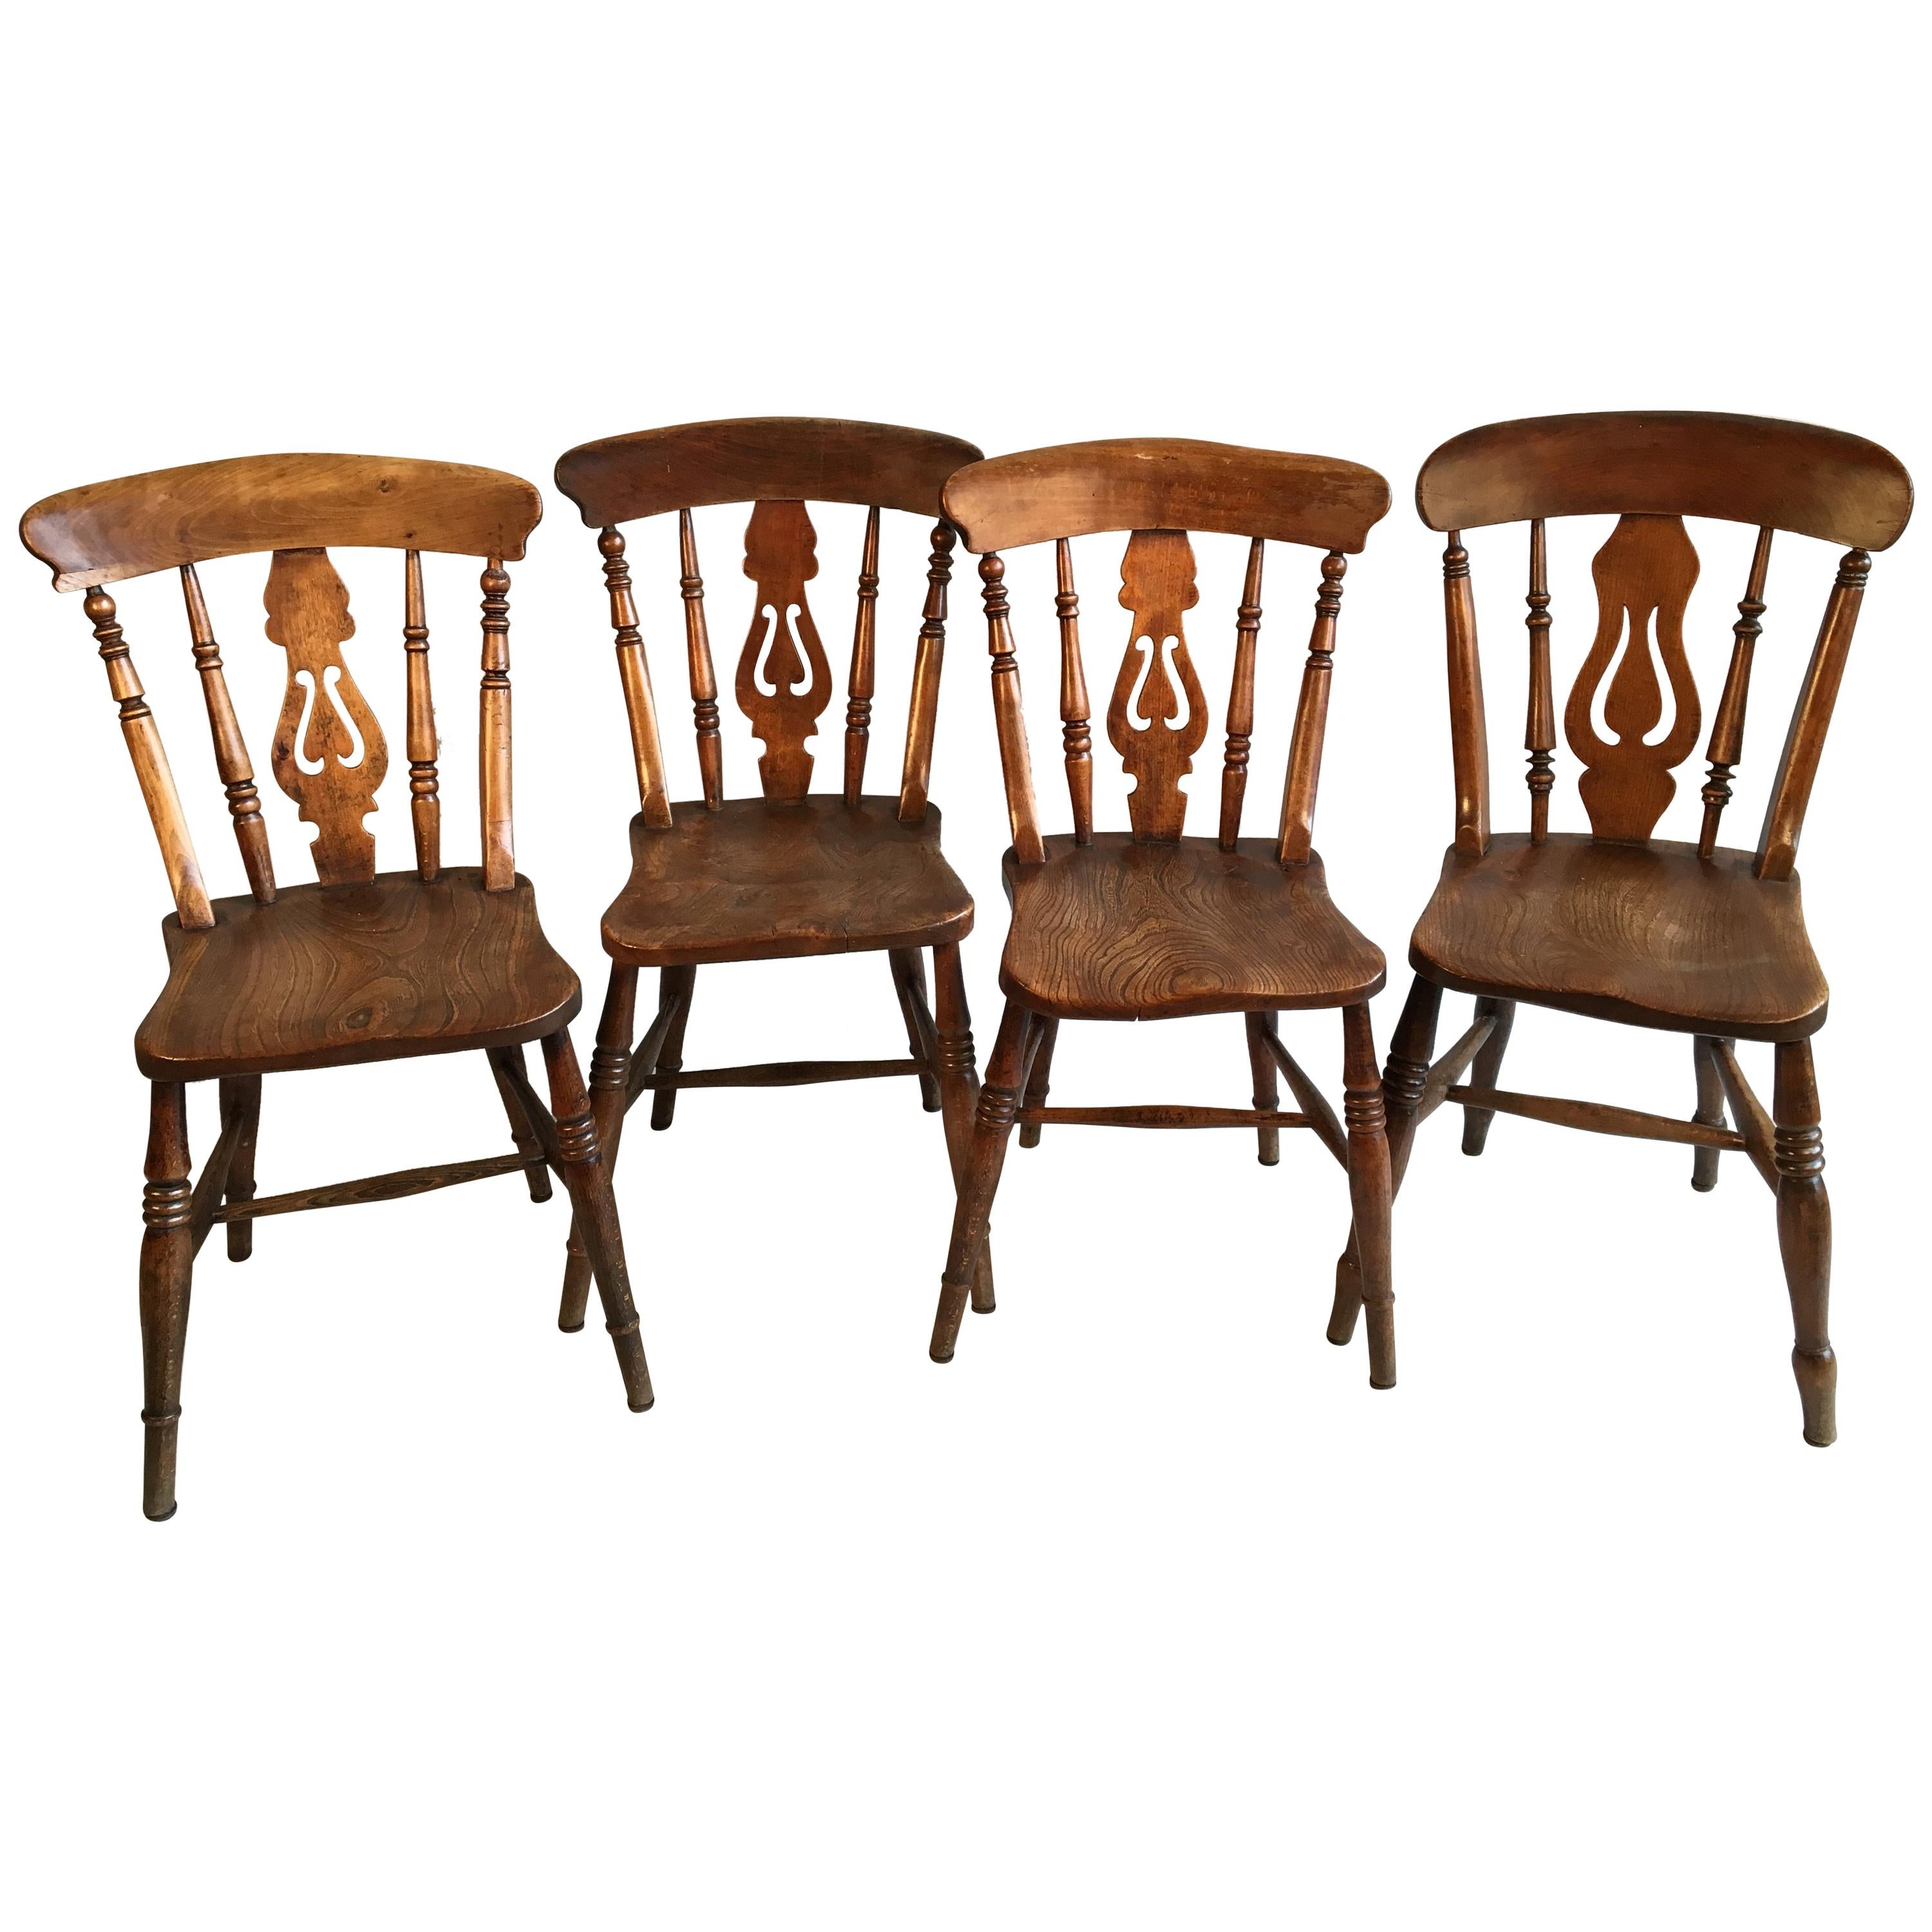 Set of 4 English Country Chairs, 19th Century